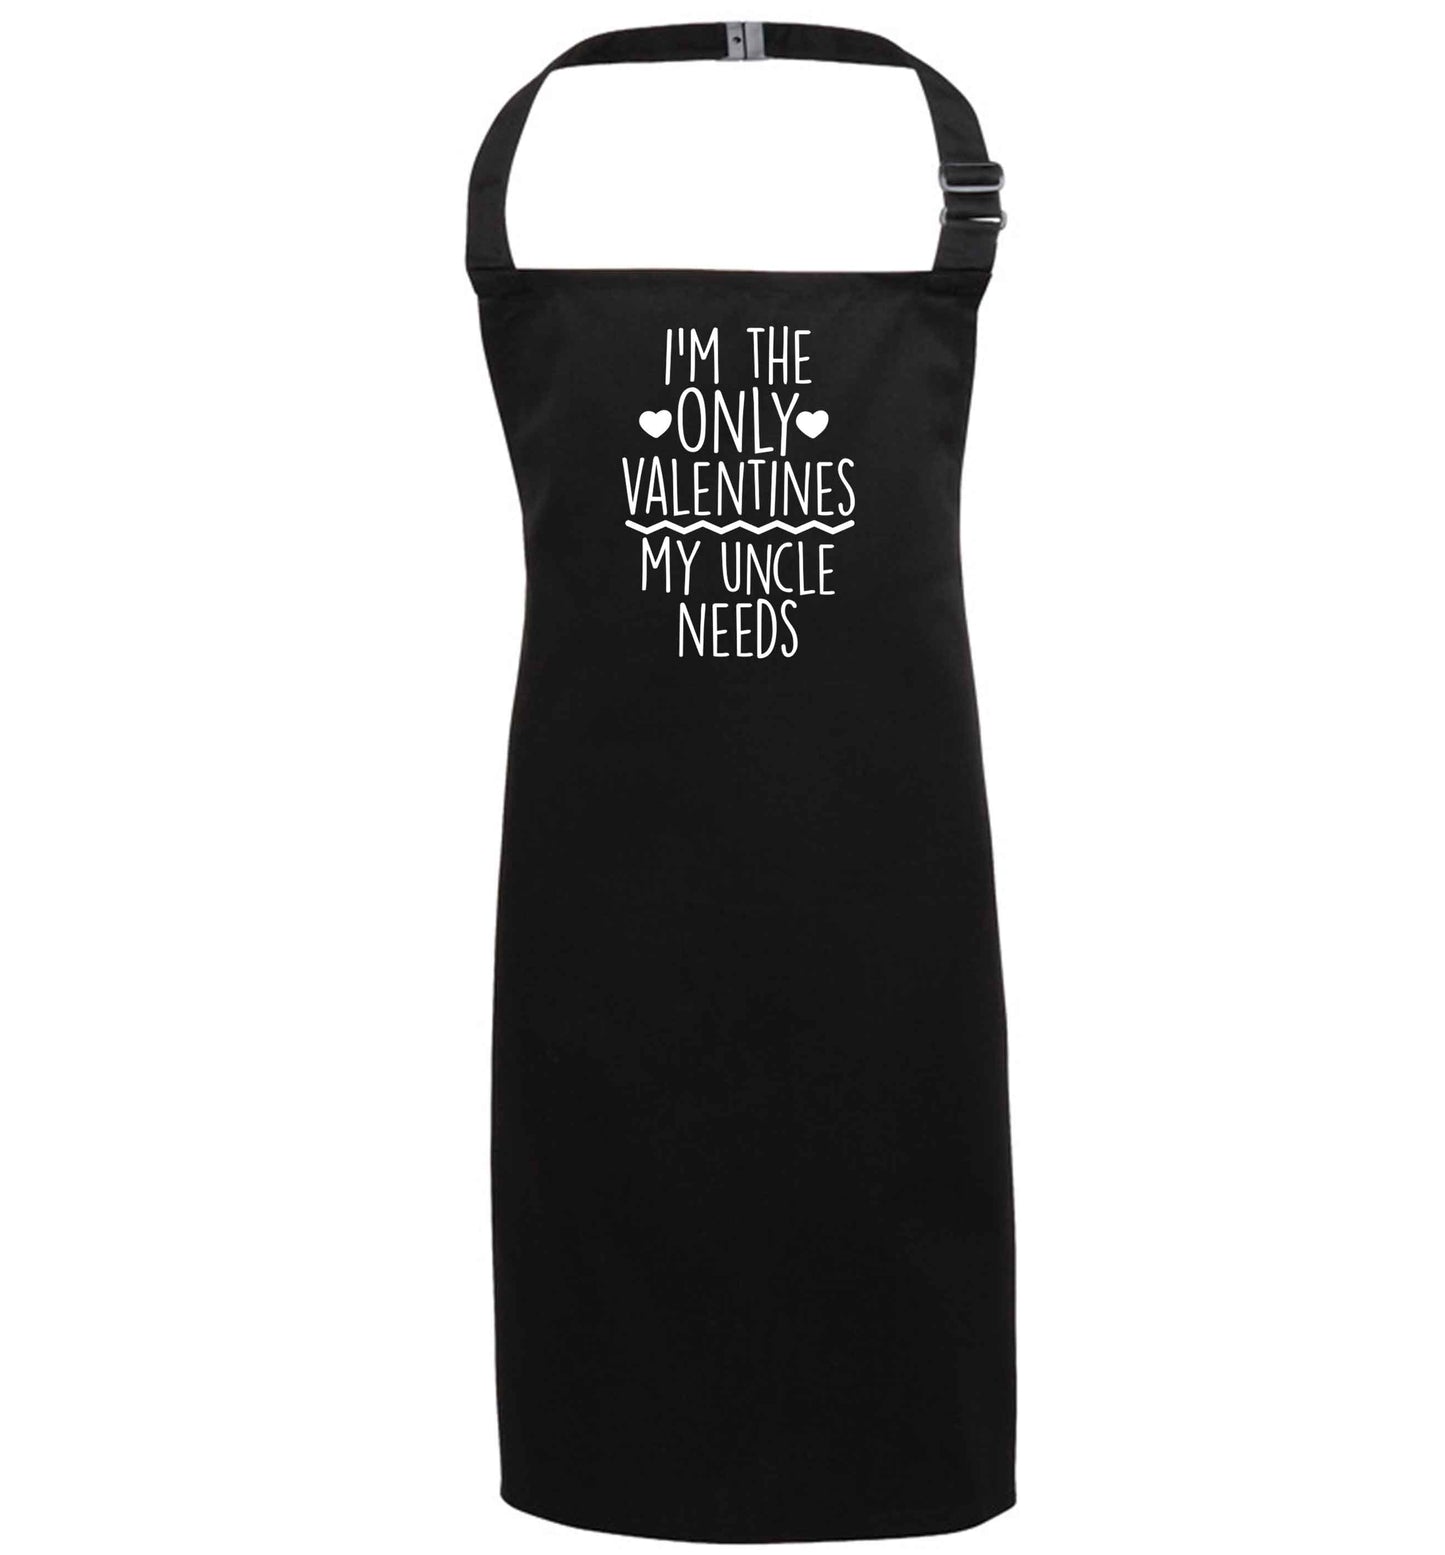 I'm the only valentines my uncle needs black apron 7-10 years